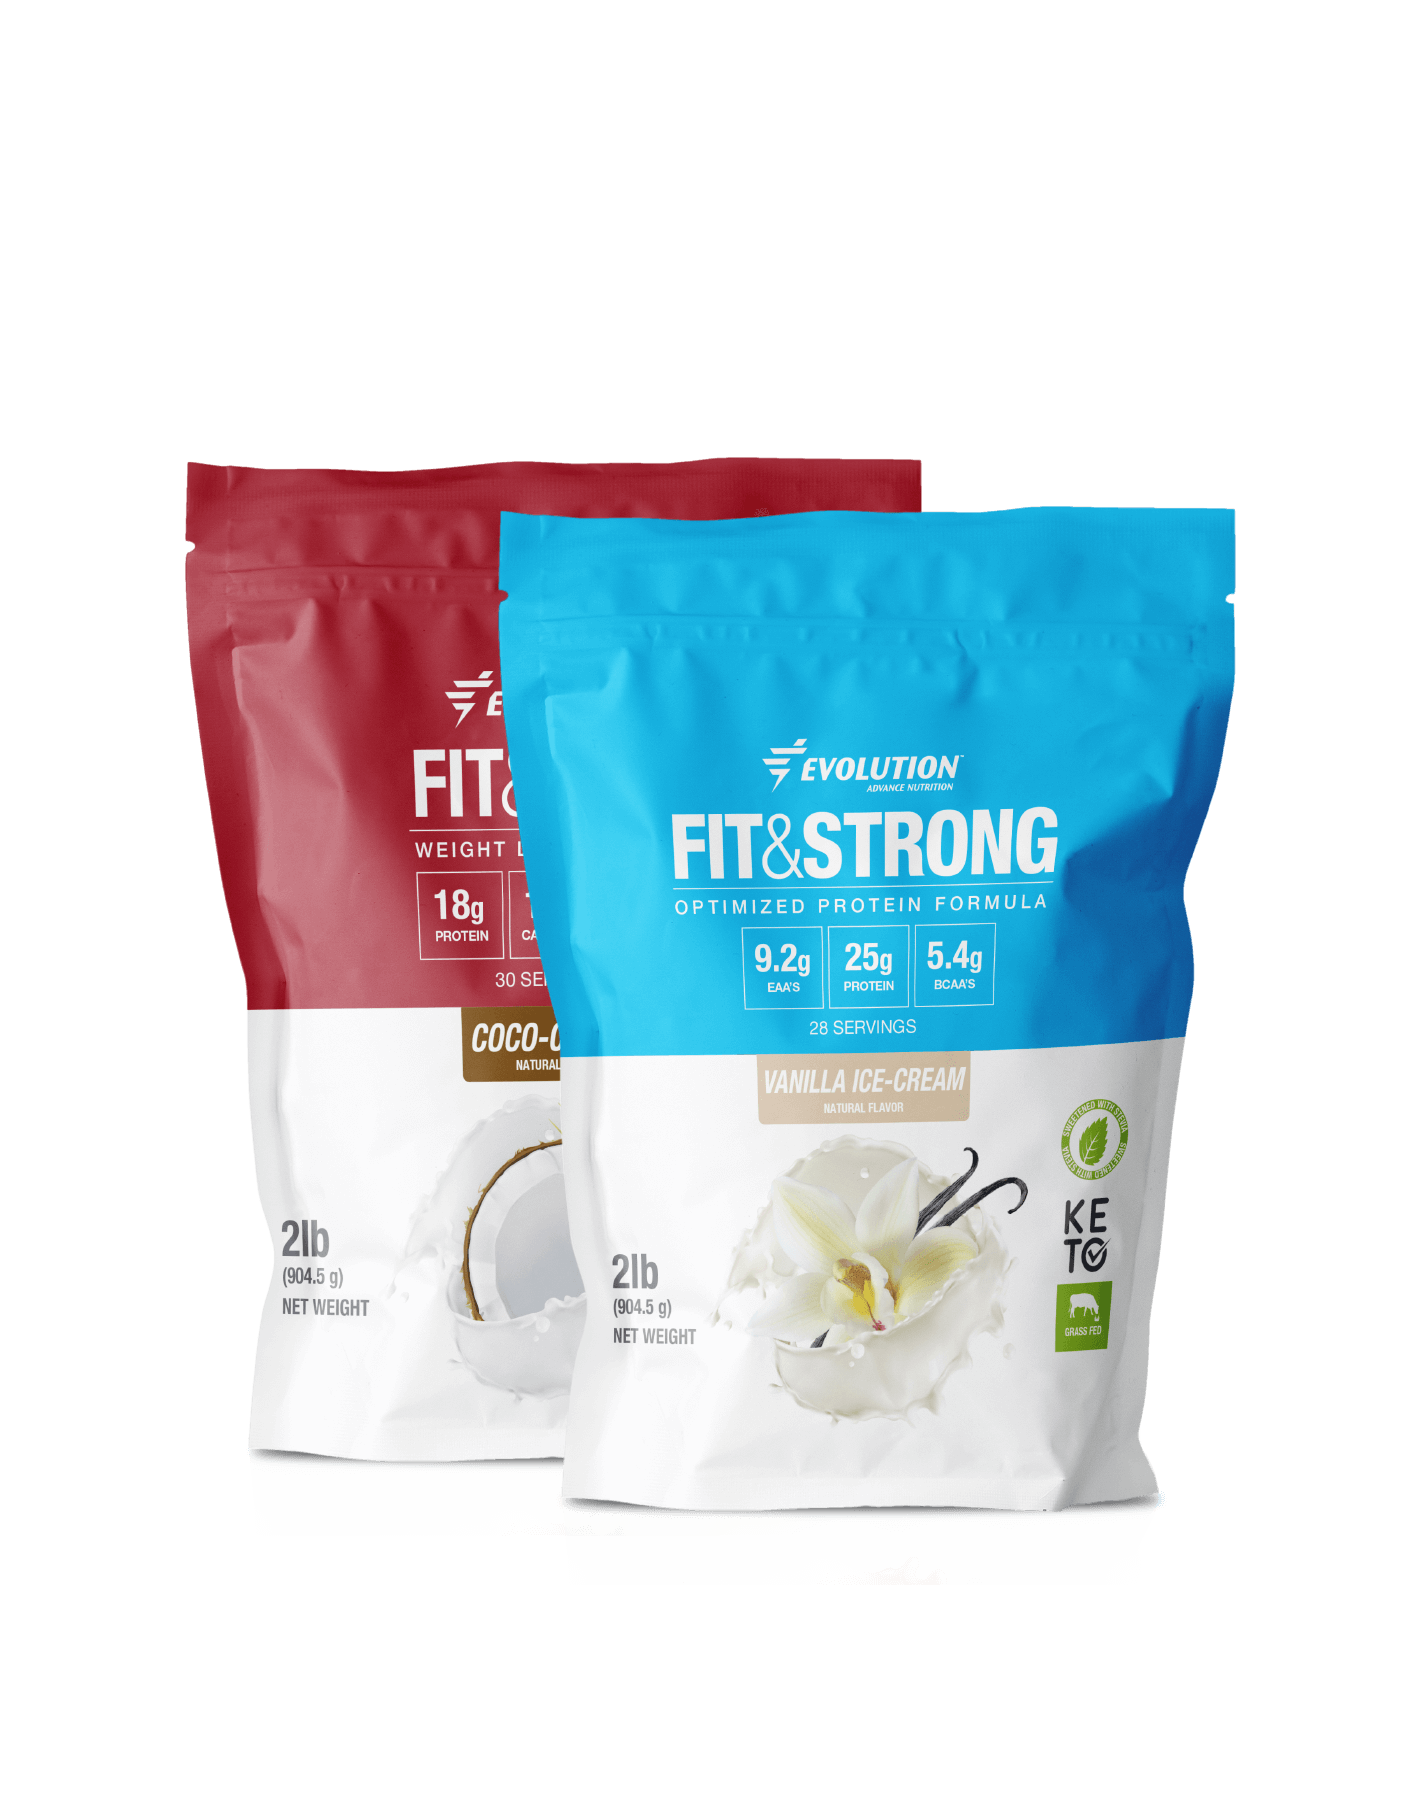 Fit&Slim + Fit&Strong Stack